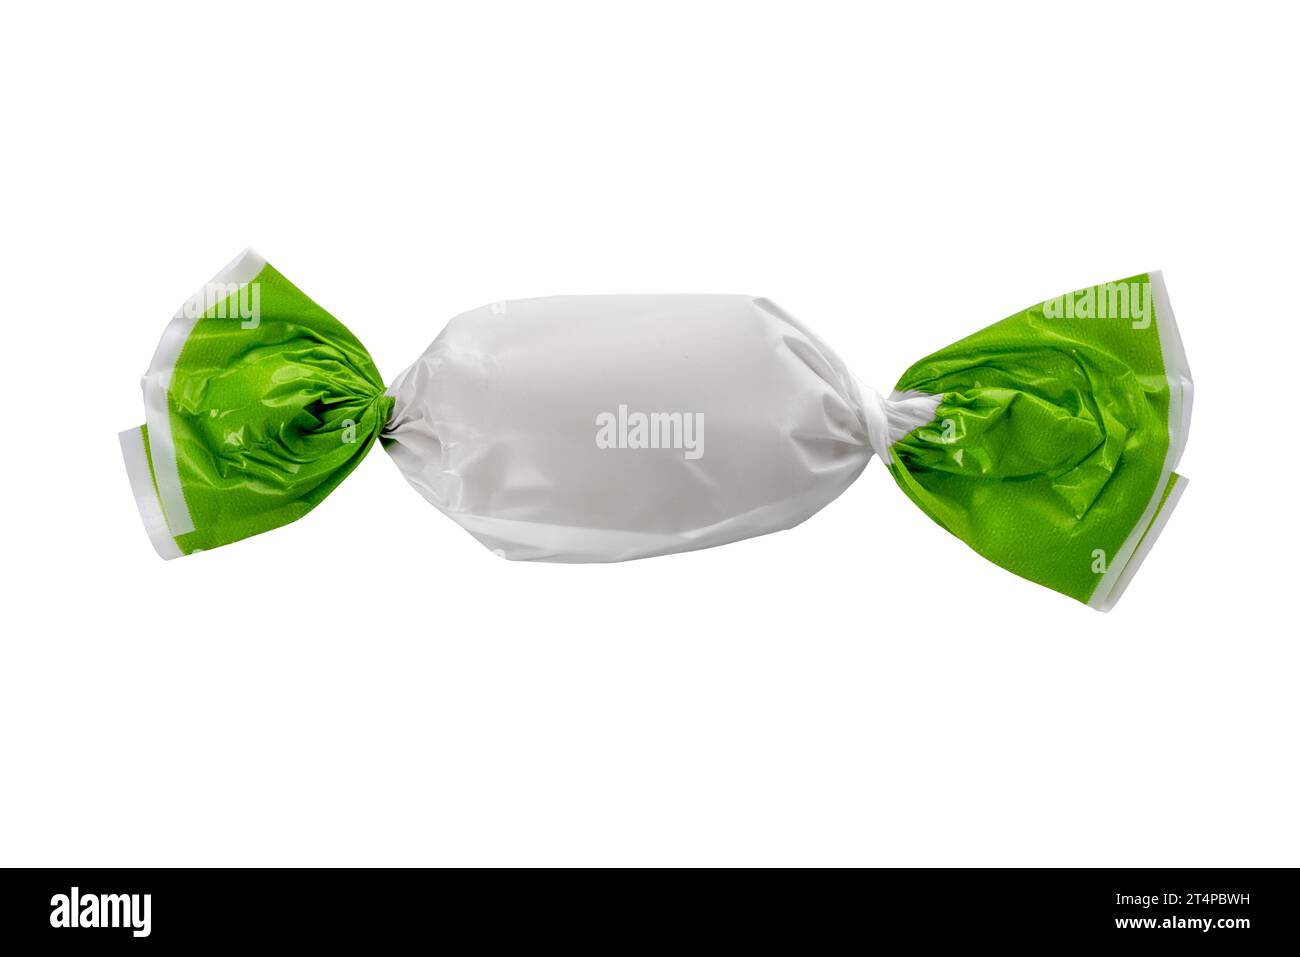 Candy wrapped with green and white paper, close up isolated on white with clipping path included Stock Photo